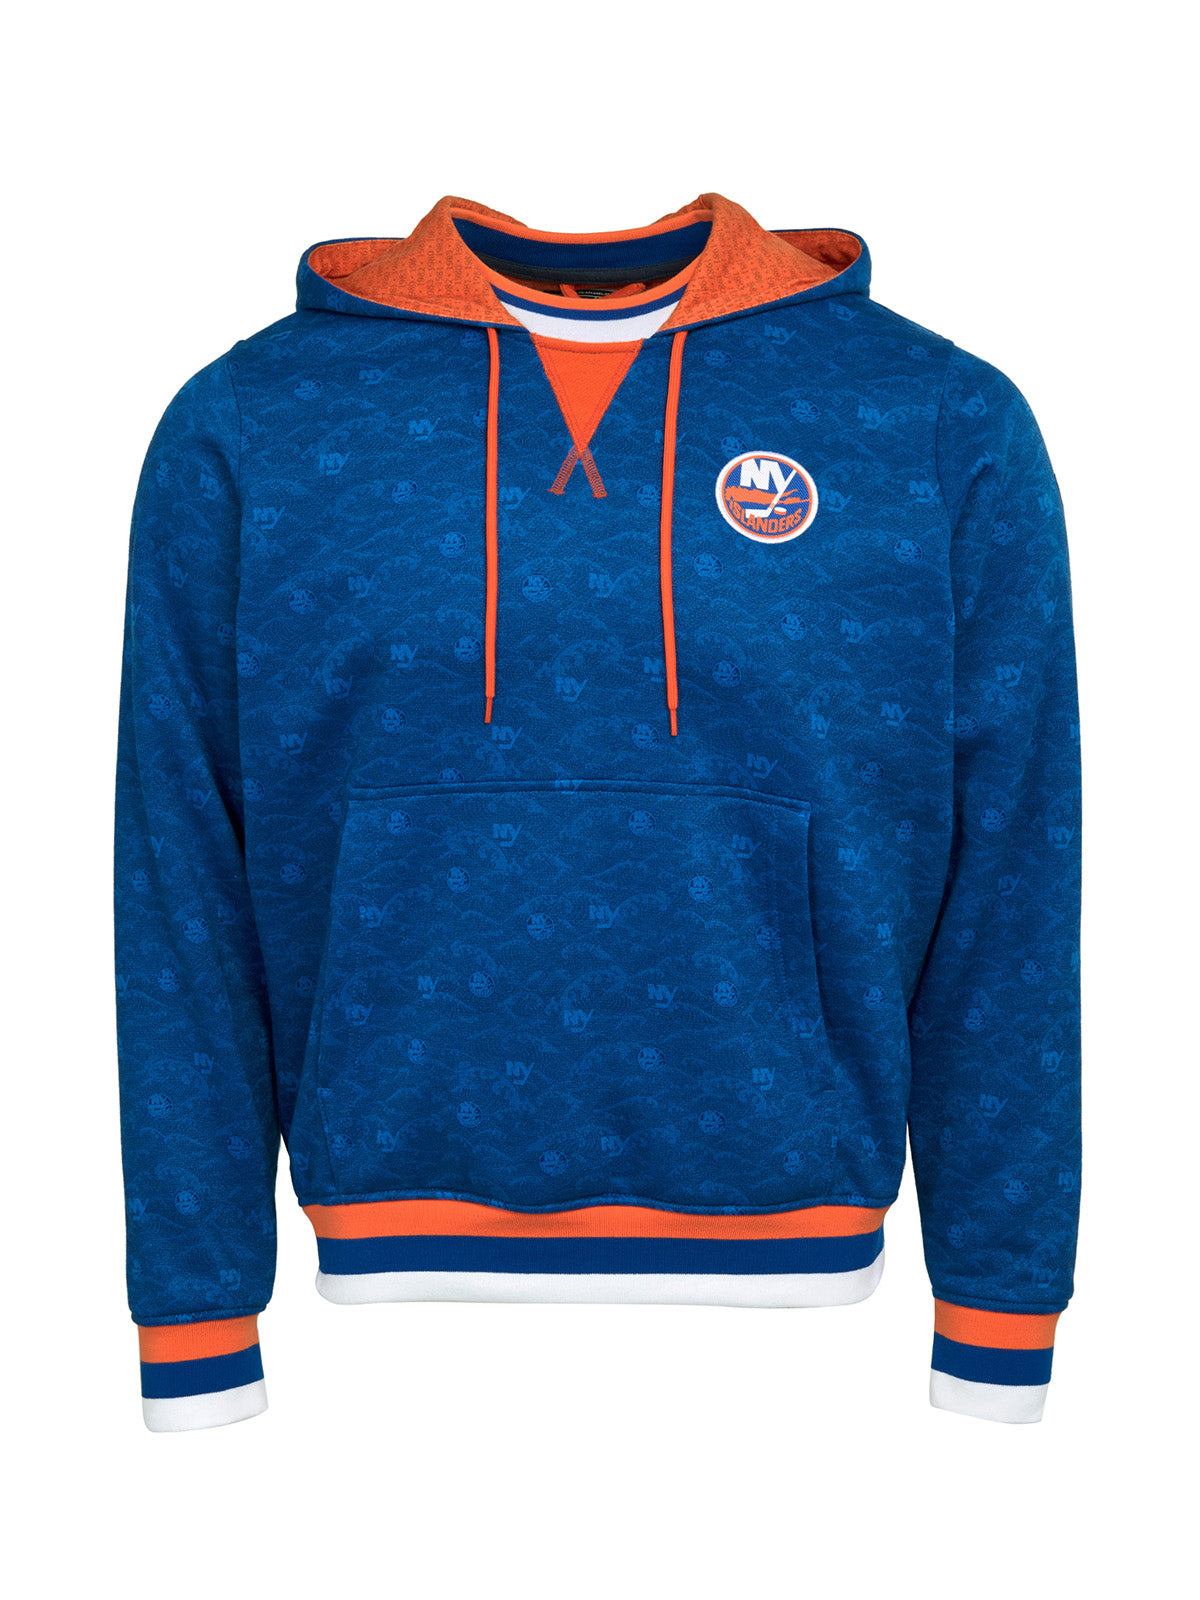 New York Islanders Hoodie - Show your team spirit, with the iconic team logo patch on the front left chest, and proudly display your New York Islanders support in their team colors with this NHL hockey hoodie.